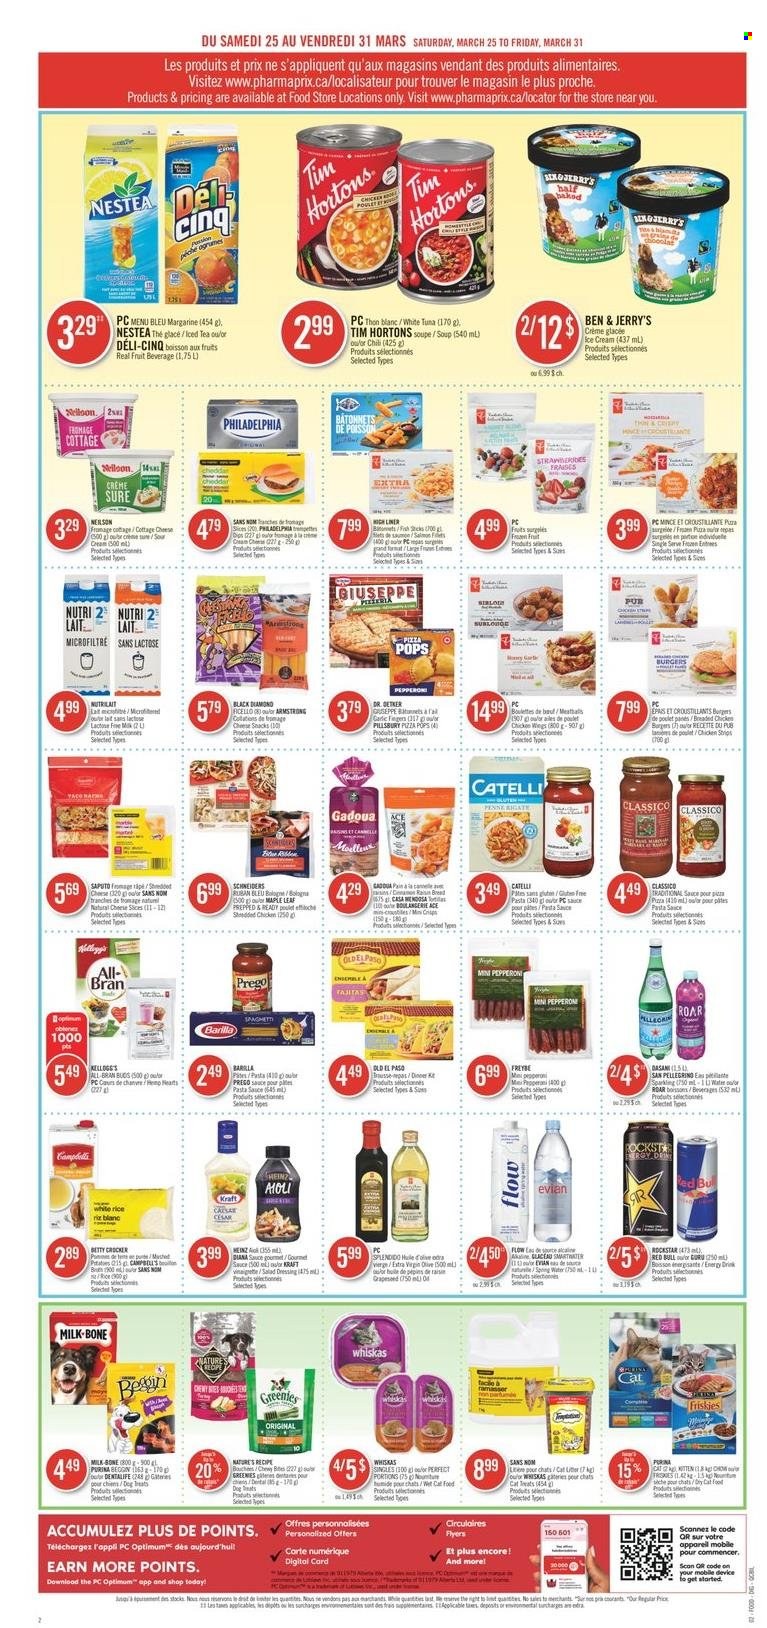 thumbnail - Pharmaprix Flyer - March 25, 2023 - March 31, 2023 - Sales products - bread, Old El Paso, Ace, fish, pizza, pasta sauce, soup, hamburger, Pillsbury, Kraft®, bologna sausage, pepperoni, cottage cheese, sliced cheese, cheddar, Dr. Oetker, milk, margarine, sour cream, ice cream, Ben & Jerry's, chicken wings, strips, chicken strips, snack, Mars, Kellogg's, All-Bran, rice, white rice, penne, salad dressing, vinaigrette dressing, dressing, Classico, extra virgin olive oil, energy drink, ice tea, Red Bull, Rockstar, Smartwater, Evian, San Pellegrino, water, chicken, Sure, animal food, cat food, Purina, Optimum, Dentalife, Greenies, Friskies, wet cat food, Heinz, Philadelphia, Whiskas, Barilla. Page 5.